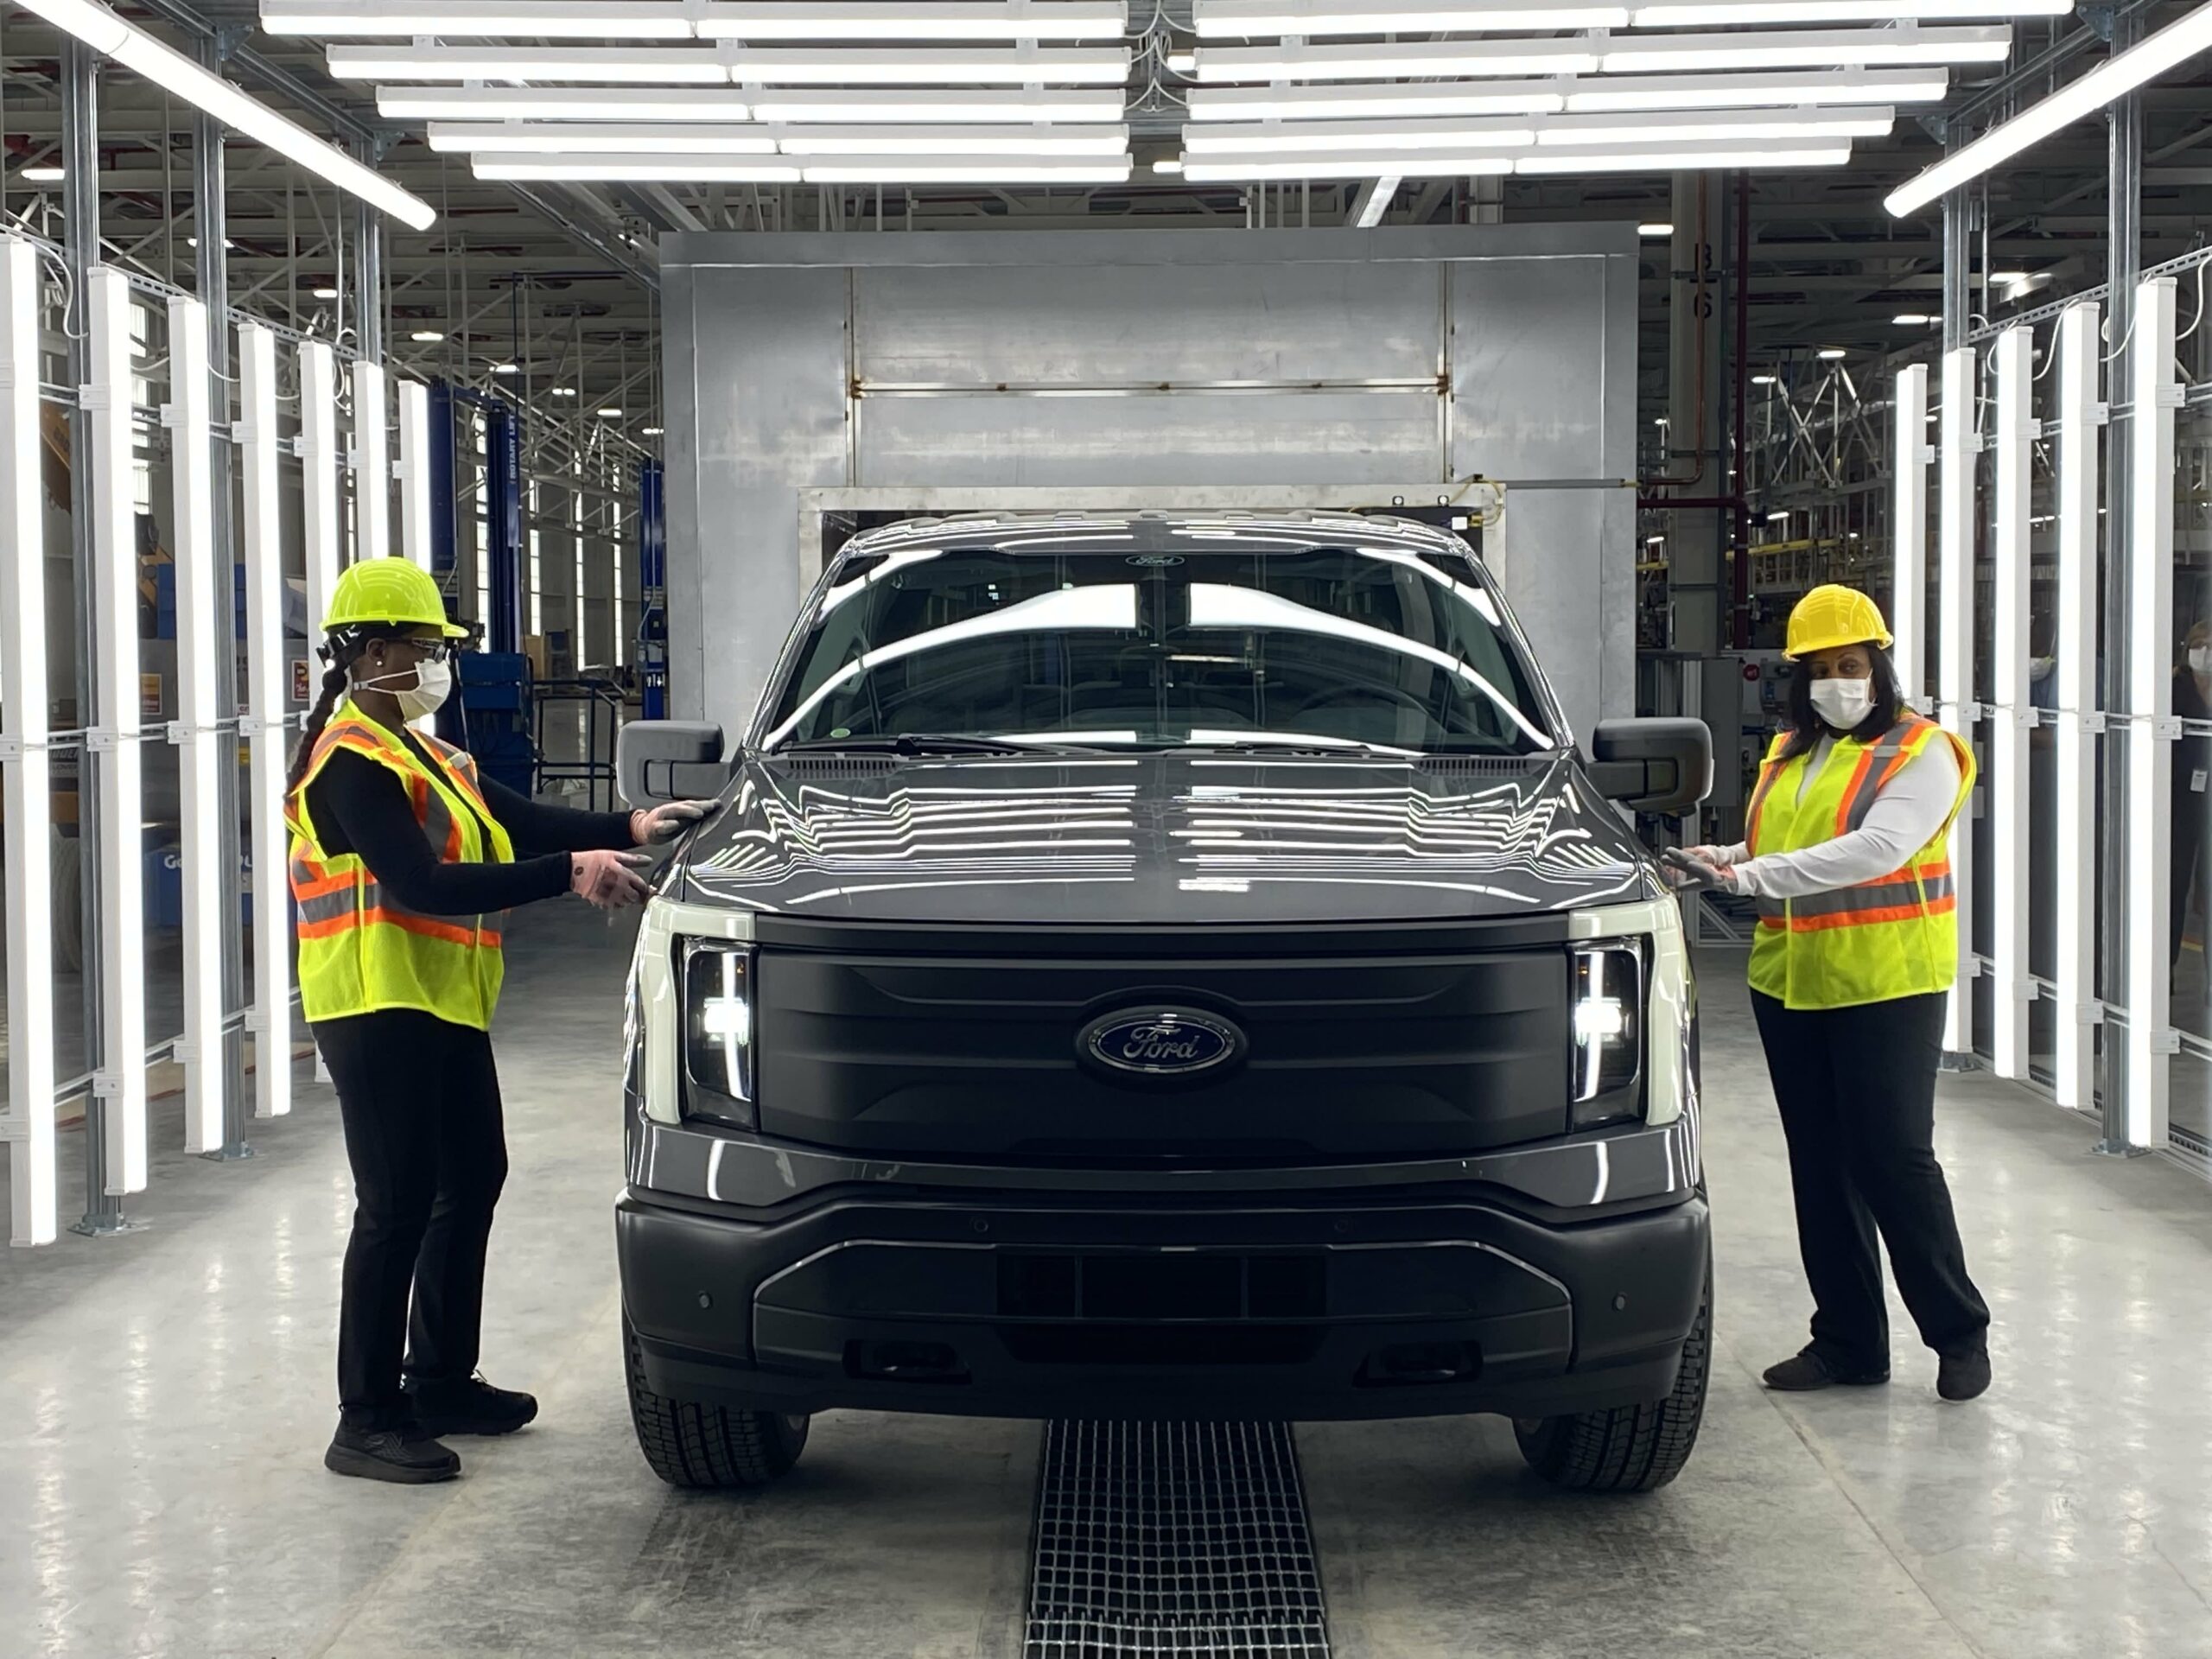 Ford plans to nearly double production of its new all-electric F-150 Lightning pickup